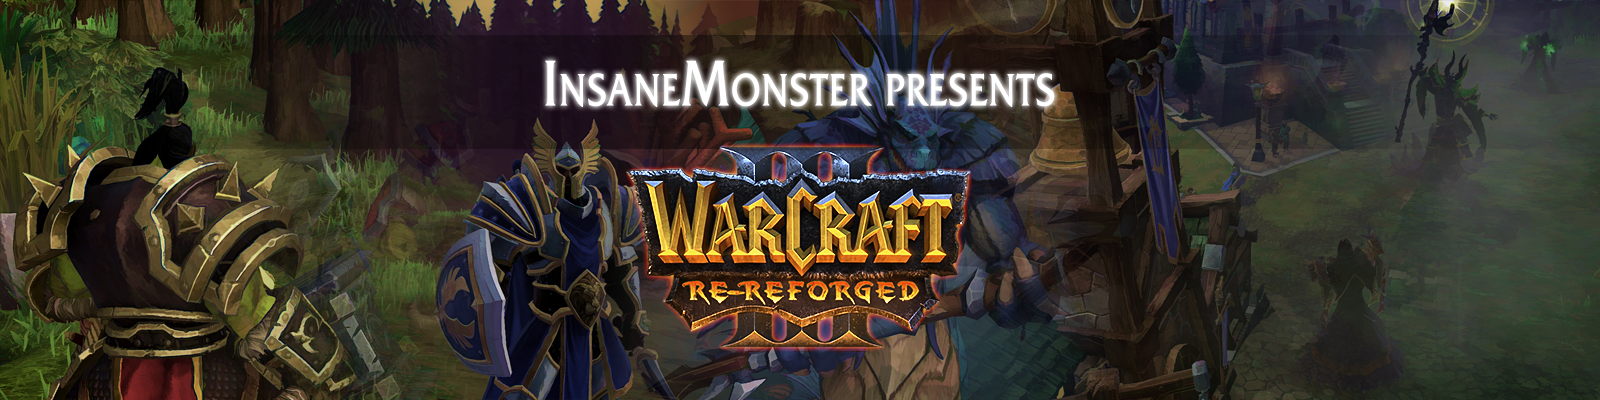 Warcraft 3 Re-Reforged Prologue Banner